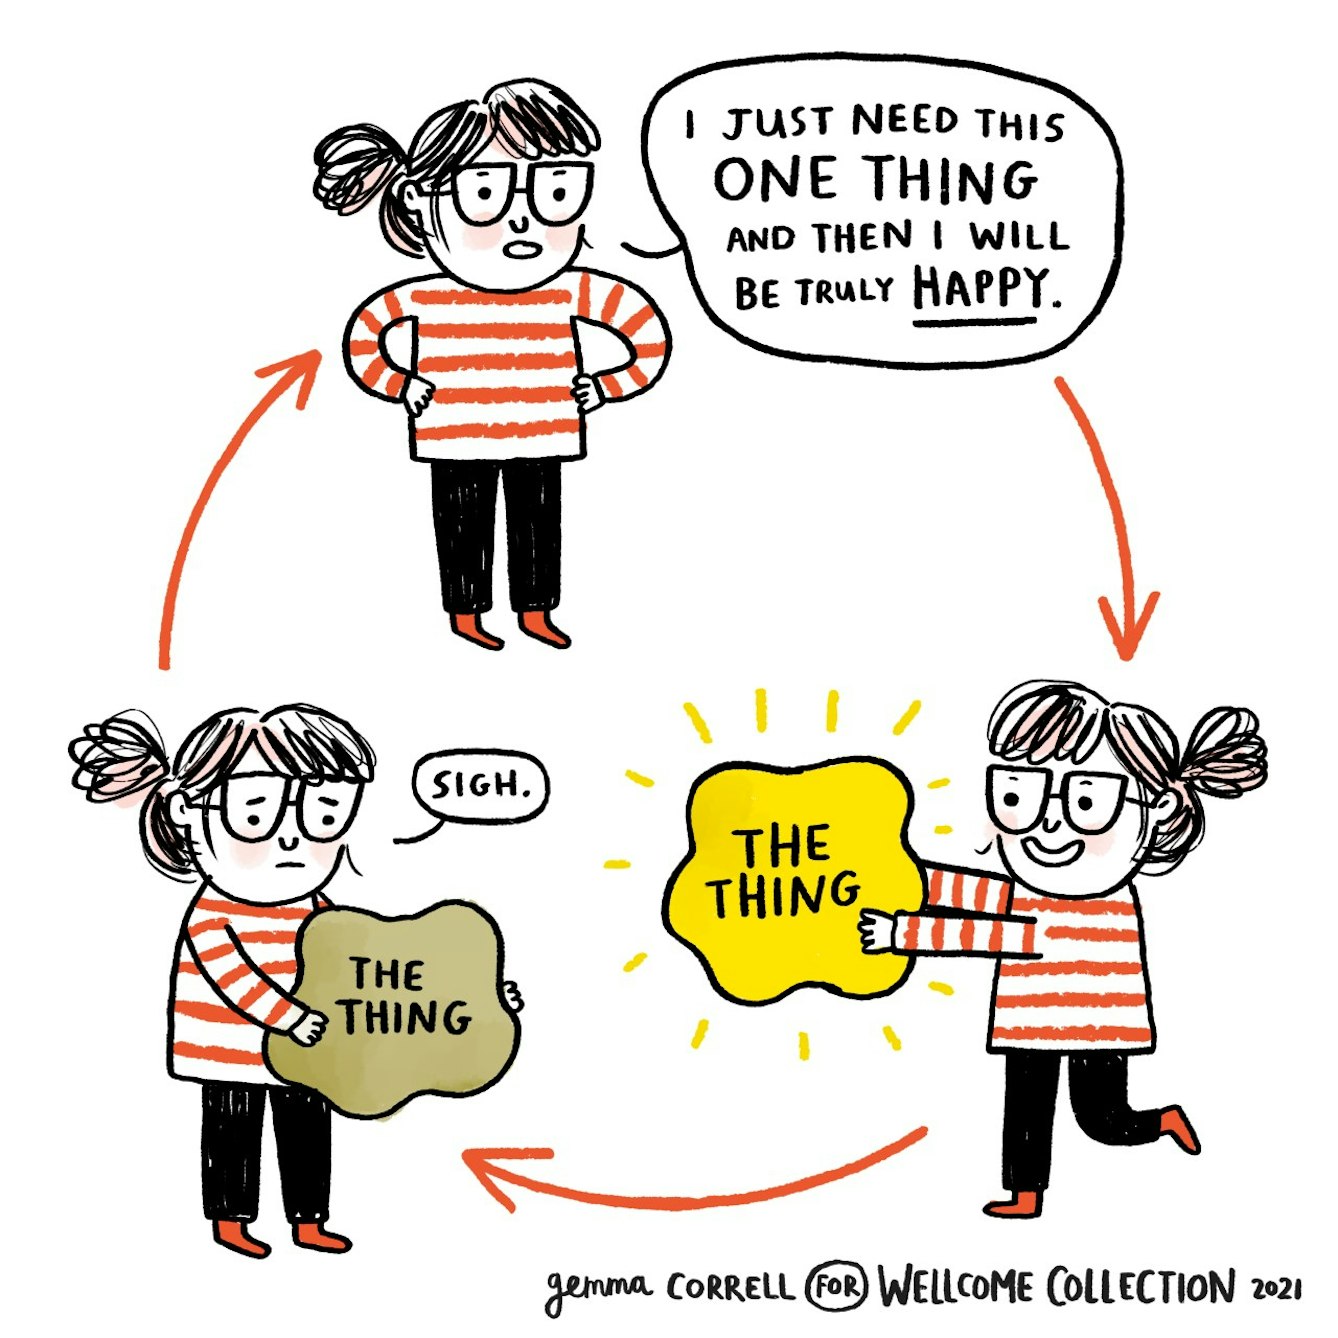 There are three drawings linked together by circular, clockwise arrows.

In the first drawing, a woman wearing glasses and a striped shirt is standing with her hands on her hips. In a speech bubble, she says -
“I just need this one thing and then I will be truly happy.”

A curved arrow points to the second drawing of the same woman. She is holding a gold blob shape that says “The thing”. She is smiling widely and hopping on one leg.

Another curved arrow points to the third drawing of the same woman. She is holding the same blob shape that says “The thing” which is now a duller gold colour. She looks sad.

Another curved arrow points to back the first drawing, creating an endless circle.